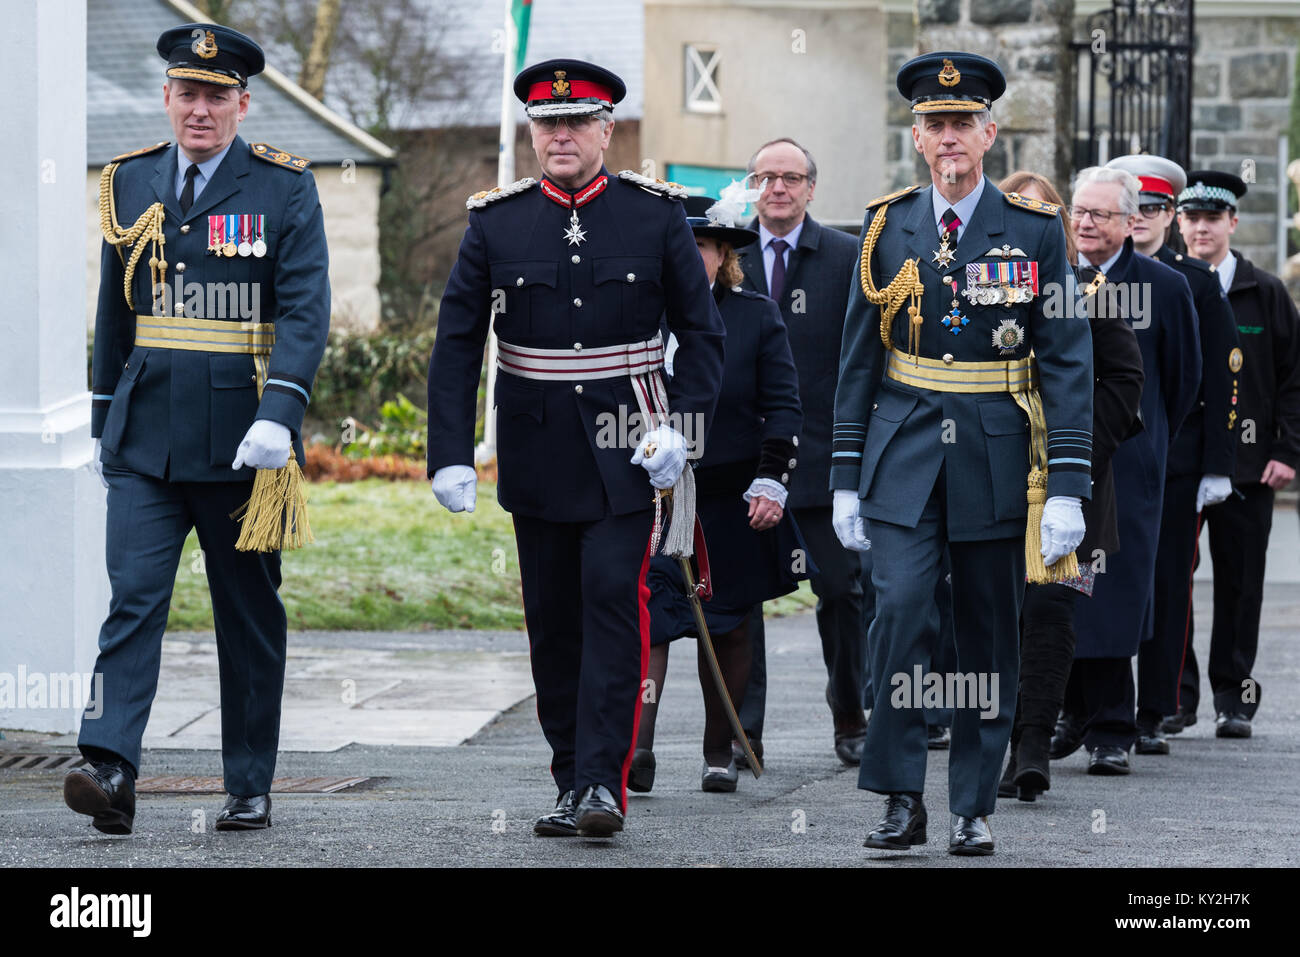 Llanystumdwy, Gwynedd, UK. 12th Jan, 2018. UK. Air Commodore Williams, Air Officer Wales (L) escorting the the Lord Lieutenant of Gwynedd (C) and Chief of the Air Staff (R) Air Chief Marshal Sir Stephen Hillier to the commemoration of Prime Minister David Lloyd George's 1917 decision to create the world's first independent Air Force in 1918. Credit: Michael Gibson/Alamy Live News Stock Photo